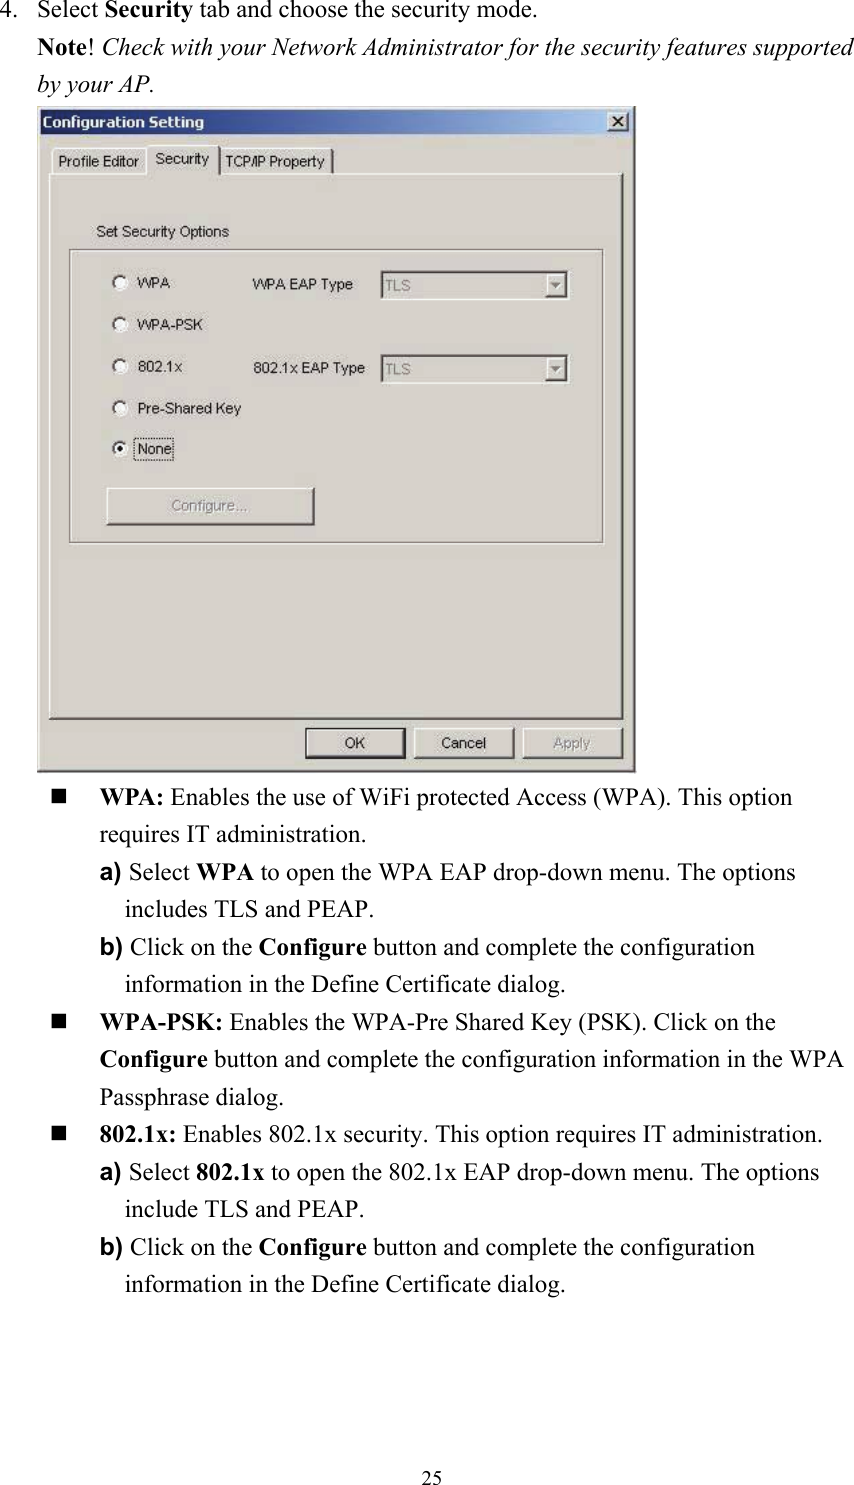  254. Select Security tab and choose the security mode. Note! Check with your Network Administrator for the security features supported by your AP.    WPA: Enables the use of WiFi protected Access (WPA). This option requires IT administration. a) Select WPA to open the WPA EAP drop-down menu. The options includes TLS and PEAP. b) Click on the Configure button and complete the configuration information in the Define Certificate dialog.   WPA-PSK: Enables the WPA-Pre Shared Key (PSK). Click on the Configure button and complete the configuration information in the WPA Passphrase dialog.   802.1x: Enables 802.1x security. This option requires IT administration. a) Select 802.1x to open the 802.1x EAP drop-down menu. The options include TLS and PEAP. b) Click on the Configure button and complete the configuration information in the Define Certificate dialog. 